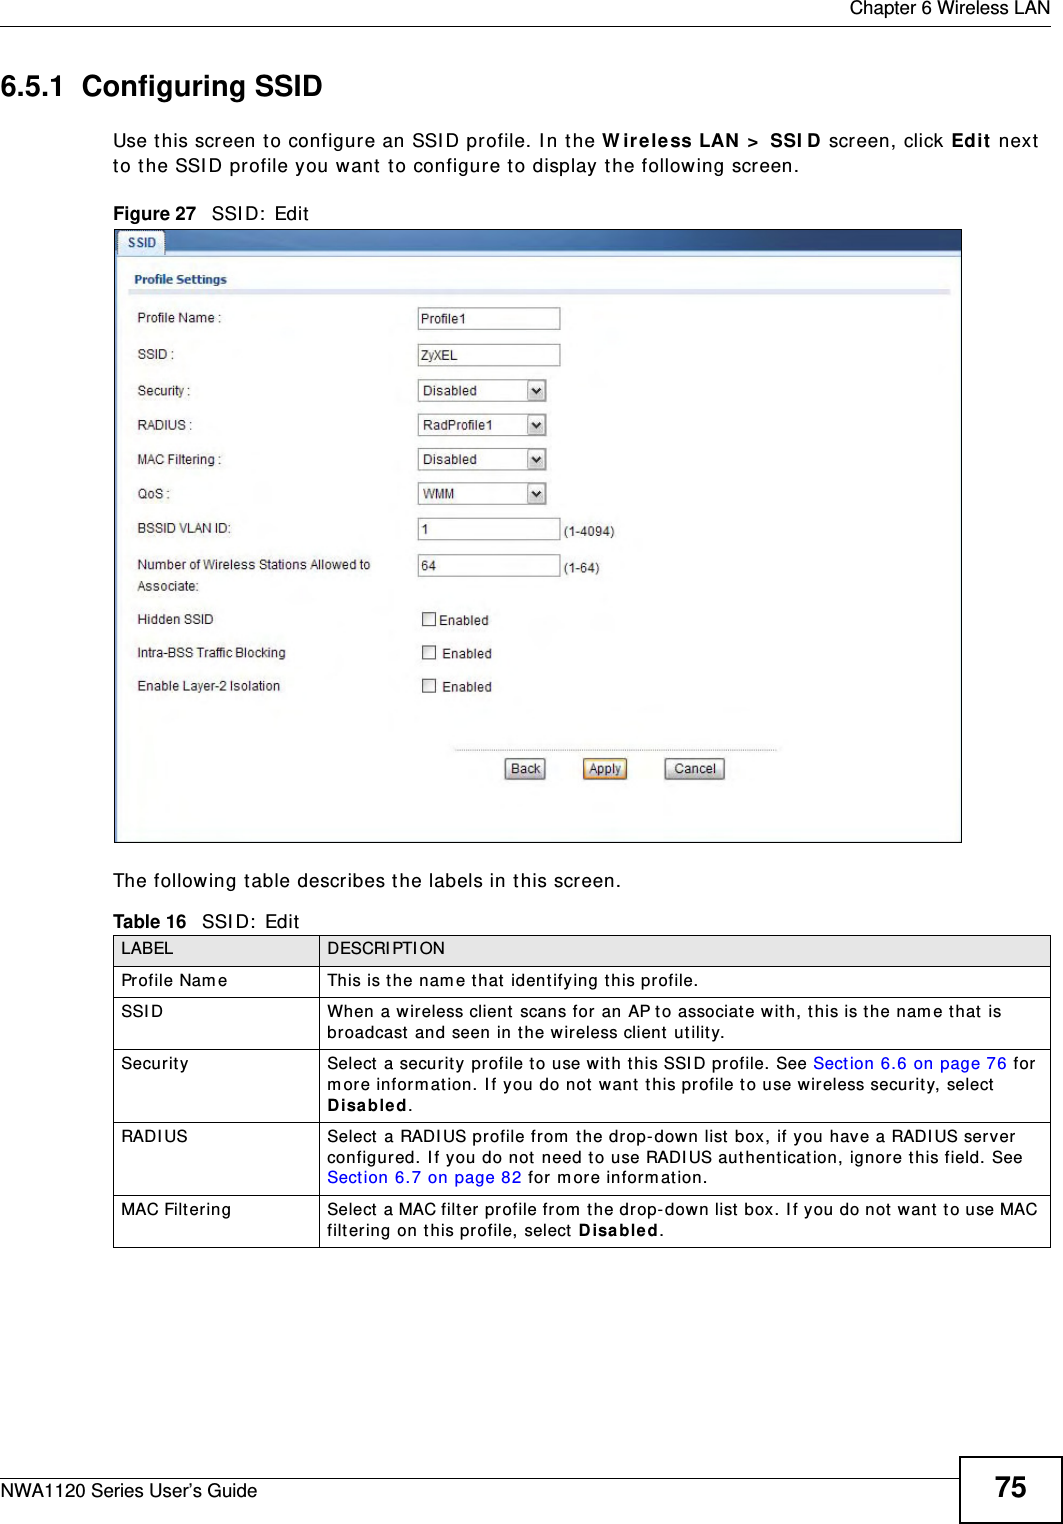  Chapter 6 Wireless LANNWA1120 Series User’s Guide 756.5.1  Configuring SSIDUse this screen to configure an SSID profile. In the Wireless LAN &gt; SSID screen, click Edit next to the SSID profile you want to configure to display the following screen.Figure 27   SSID: EditThe following table describes the labels in this screen.Table 16   SSID: EditLABEL DESCRIPTIONProfile Name This is the name that identifying this profile. SSID When a wireless client scans for an AP to associate with, this is the name that is broadcast and seen in the wireless client utility.Security Select a security profile to use with this SSID profile. See Section 6.6 on page 76 for more information. If you do not want this profile to use wireless security, select Disabled.RADIUS Select a RADIUS profile from the drop-down list box, if you have a RADIUS server configured. If you do not need to use RADIUS authentication, ignore this field. See Section 6.7 on page 82 for more information.MAC Filtering Select a MAC filter profile from the drop-down list box. If you do not want to use MAC filtering on this profile, select Disabled.